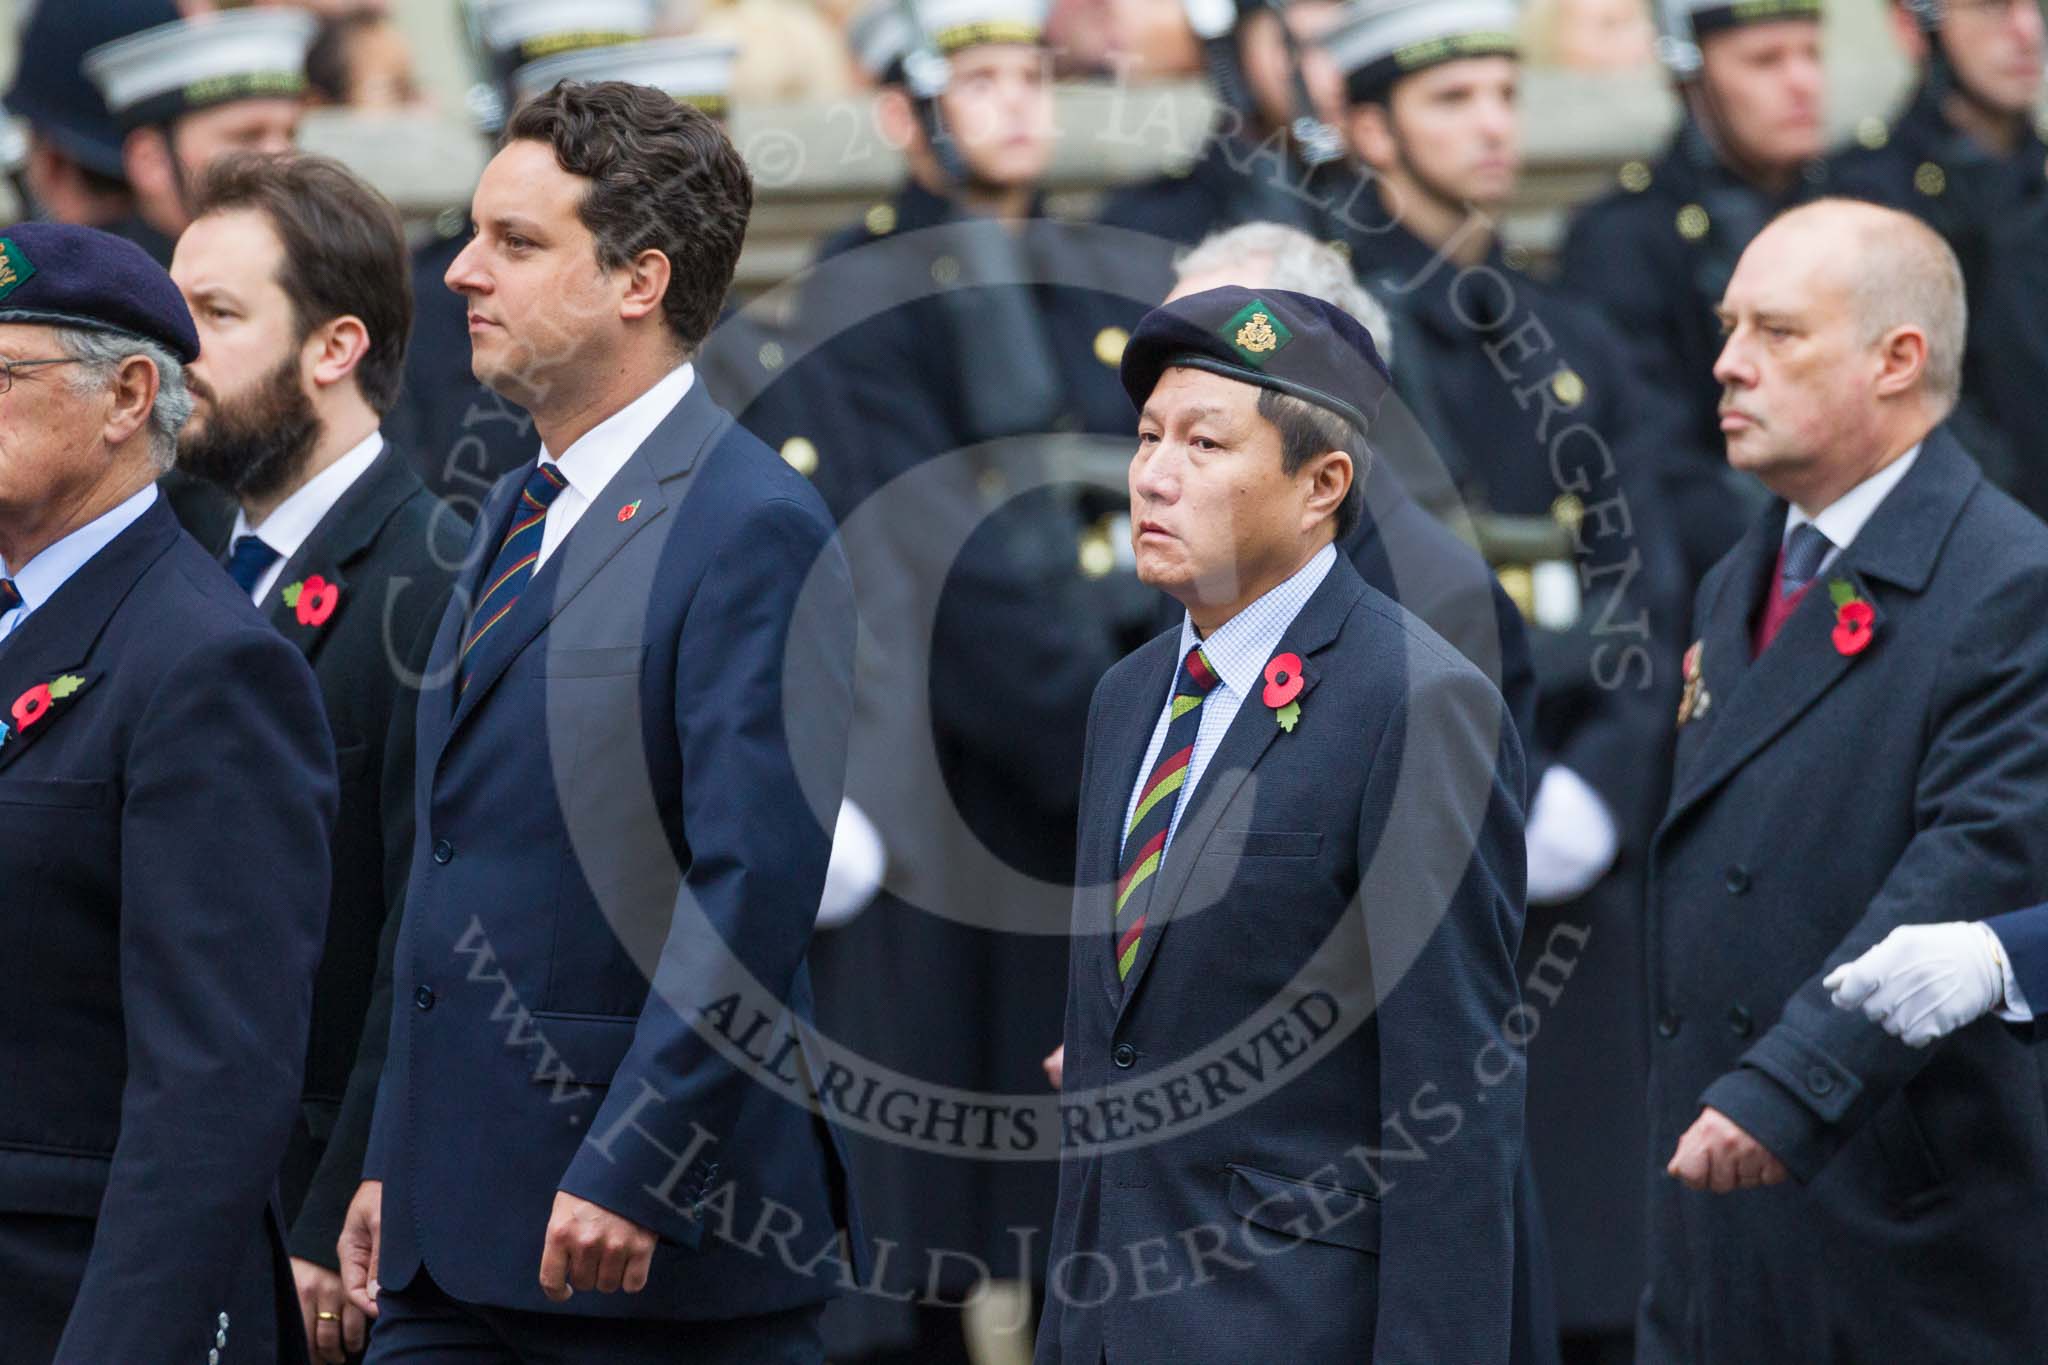 Remembrance Sunday at the Cenotaph 2015: Group D23, Royal Hong Kong Regiment Association.
Cenotaph, Whitehall, London SW1,
London,
Greater London,
United Kingdom,
on 08 November 2015 at 11:55, image #726